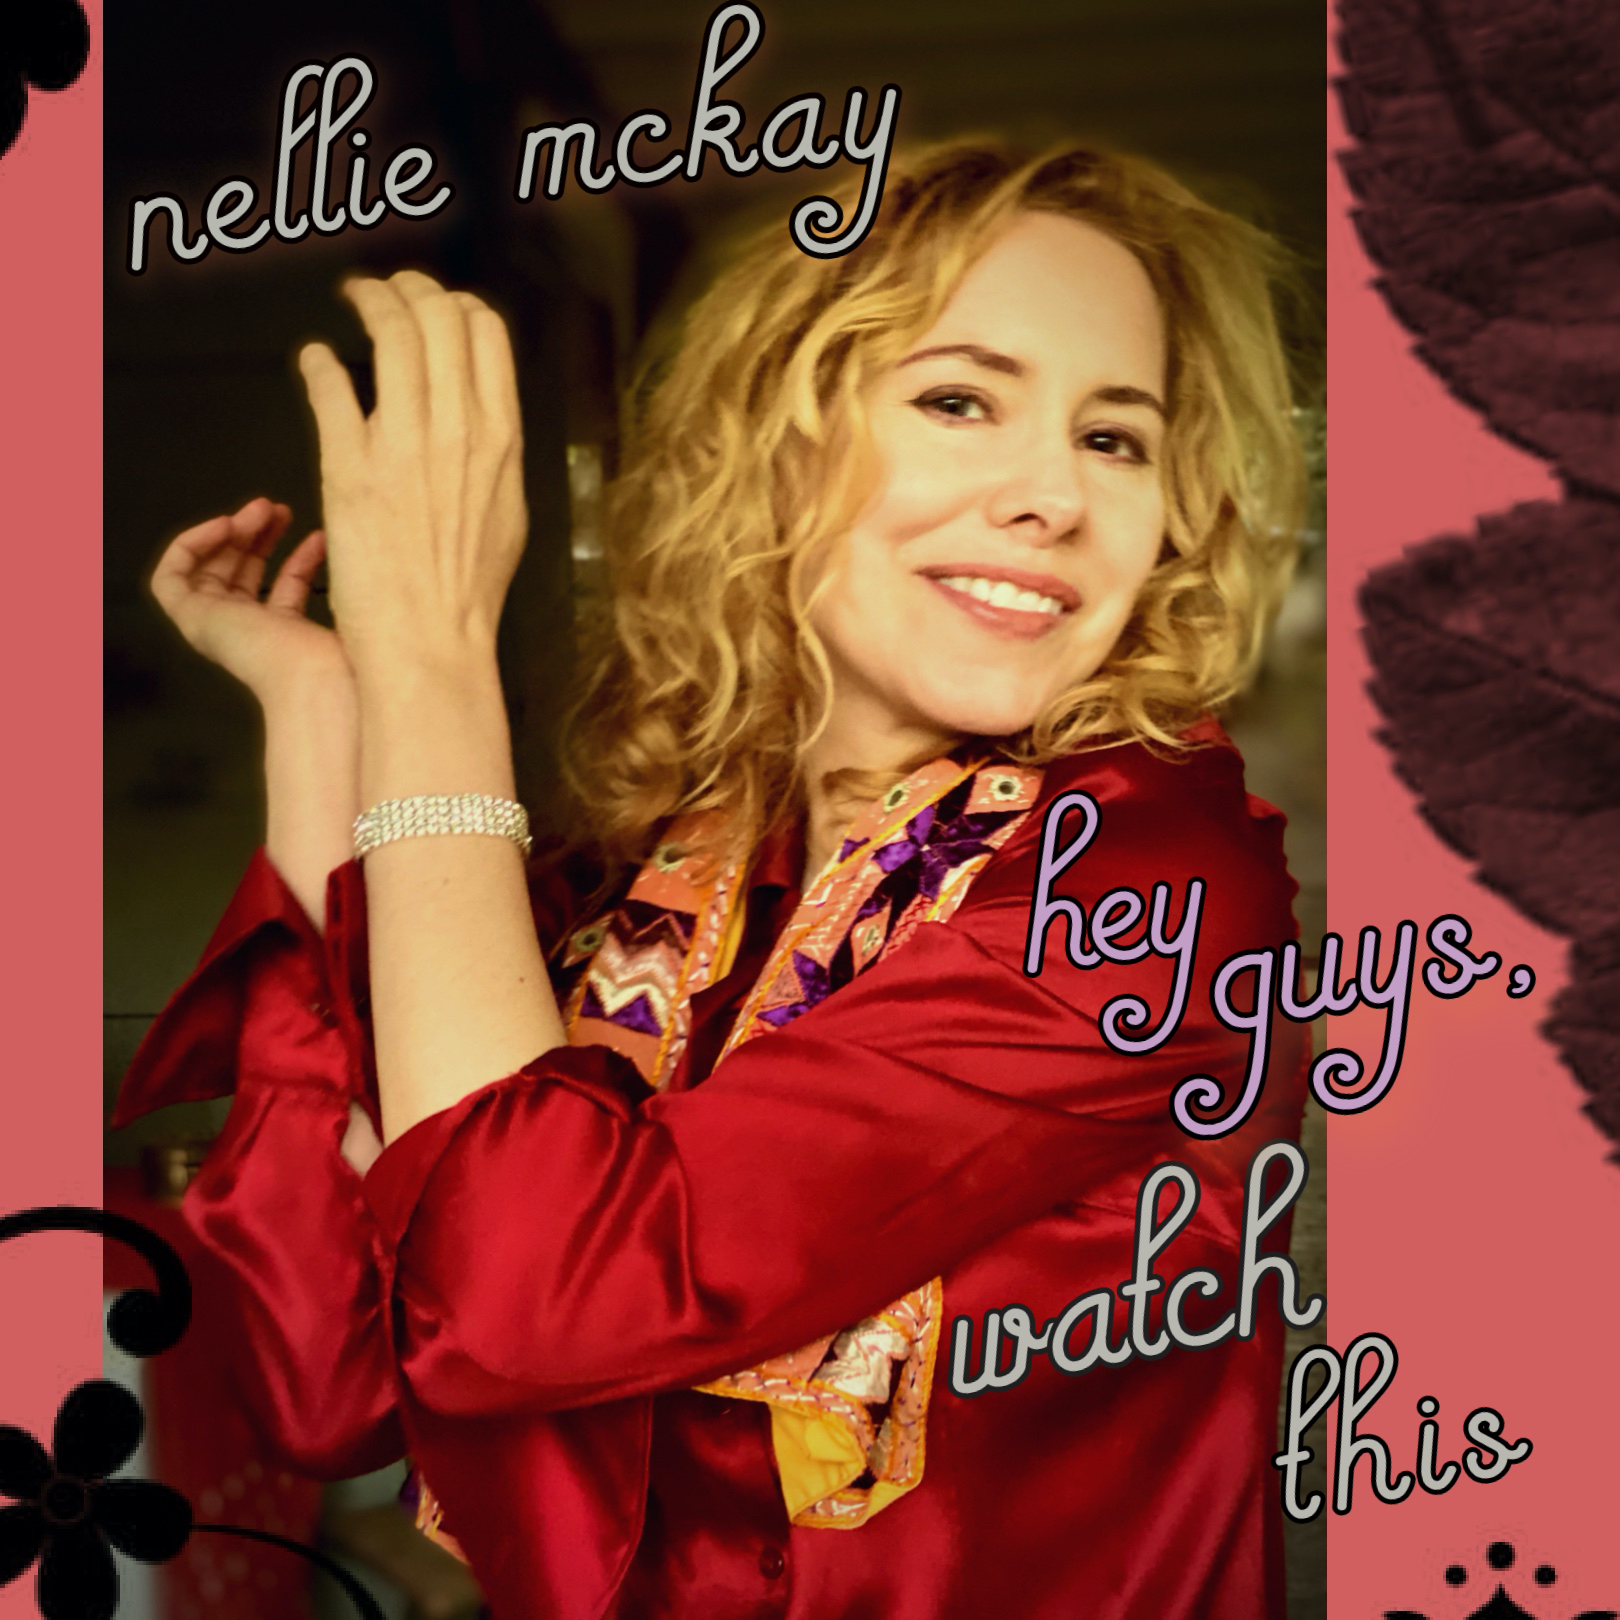 Album cover for Nellie McKay's new album Hey Guys Watch This.